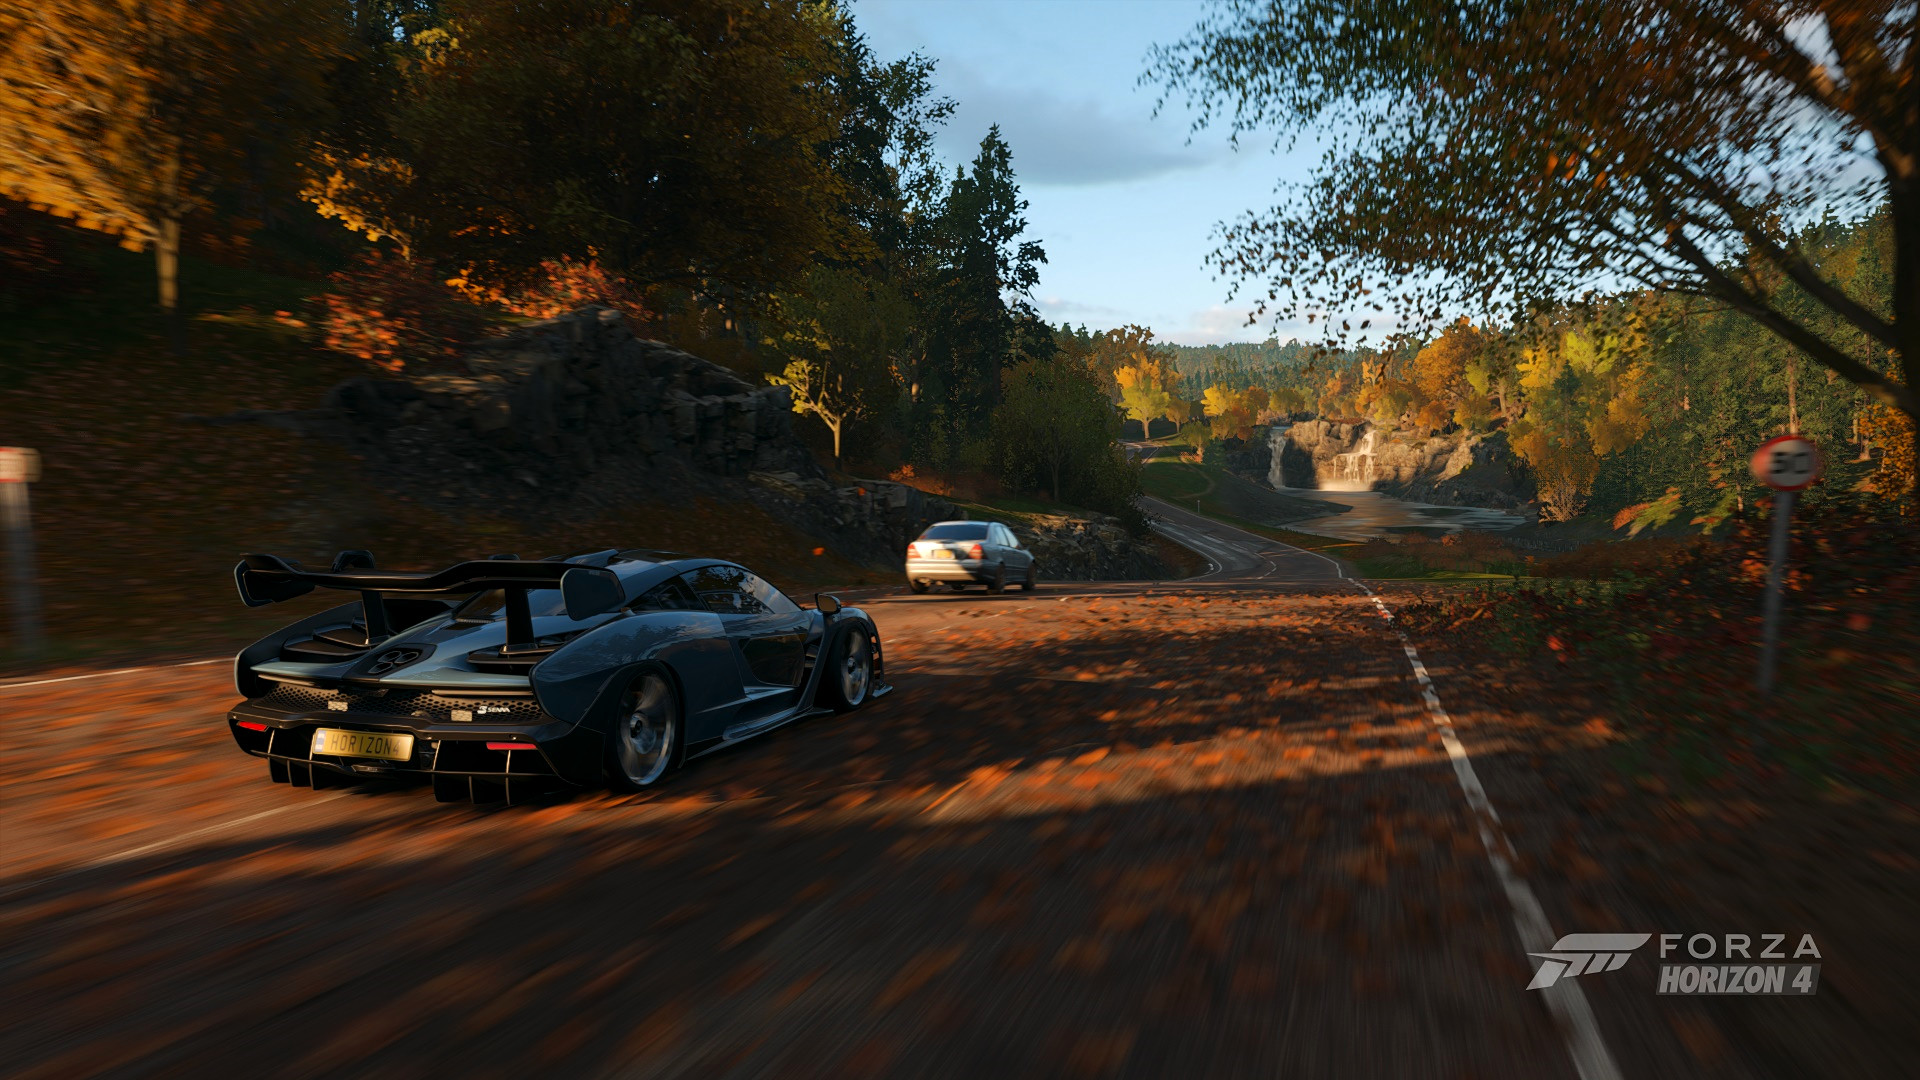 Forza Horizon 4 is getting a 30GB demo later today